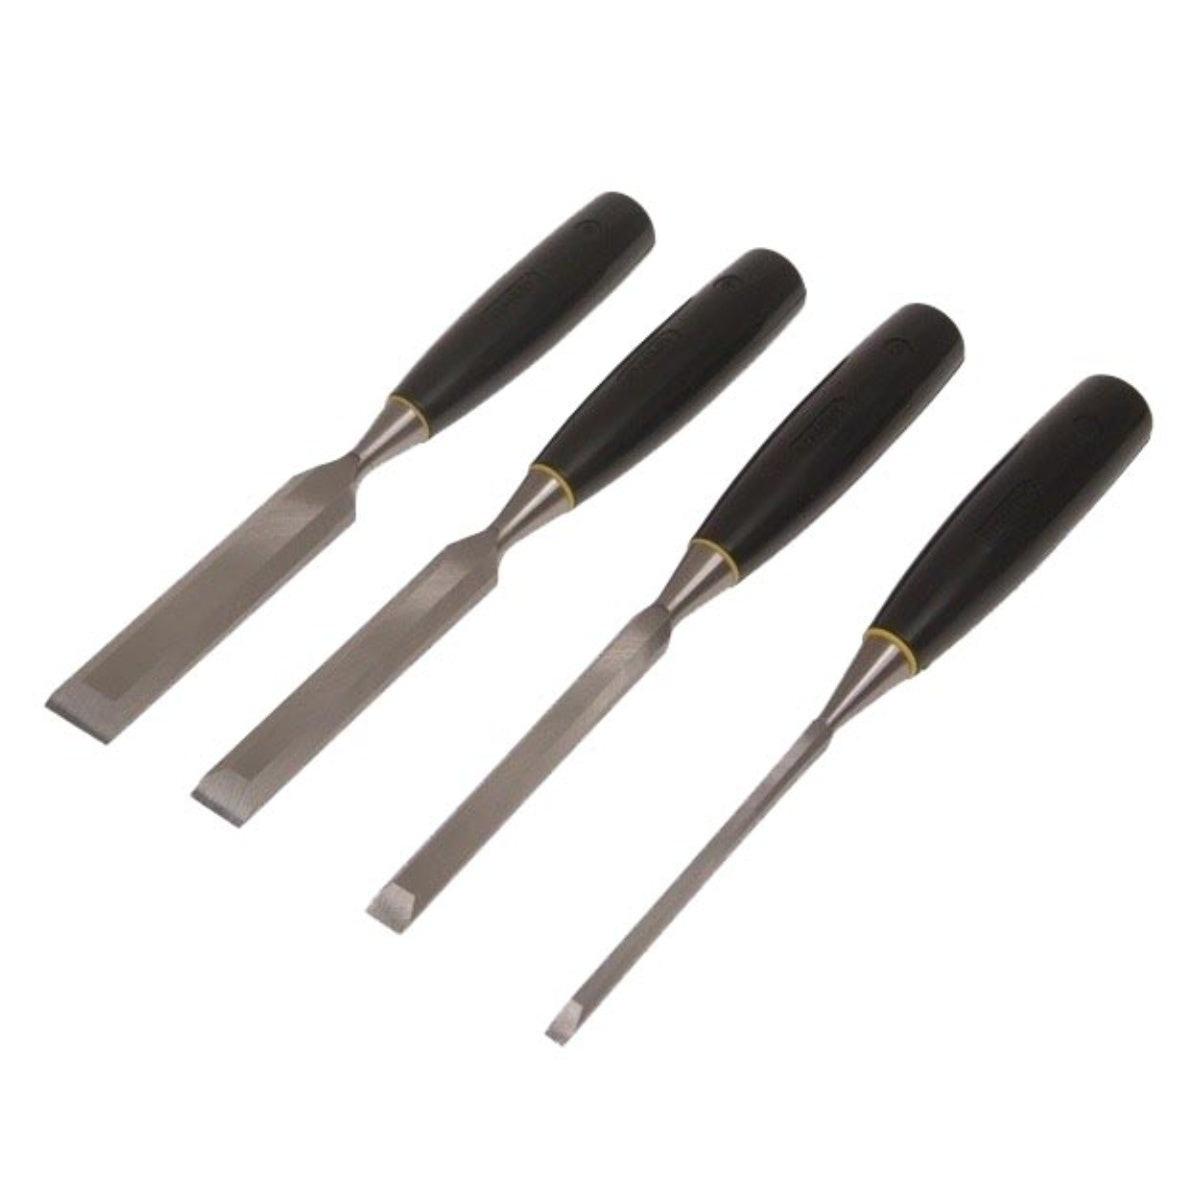 Stanley Wood Chisel Set 4pc 0-16-159 Power Tool Services